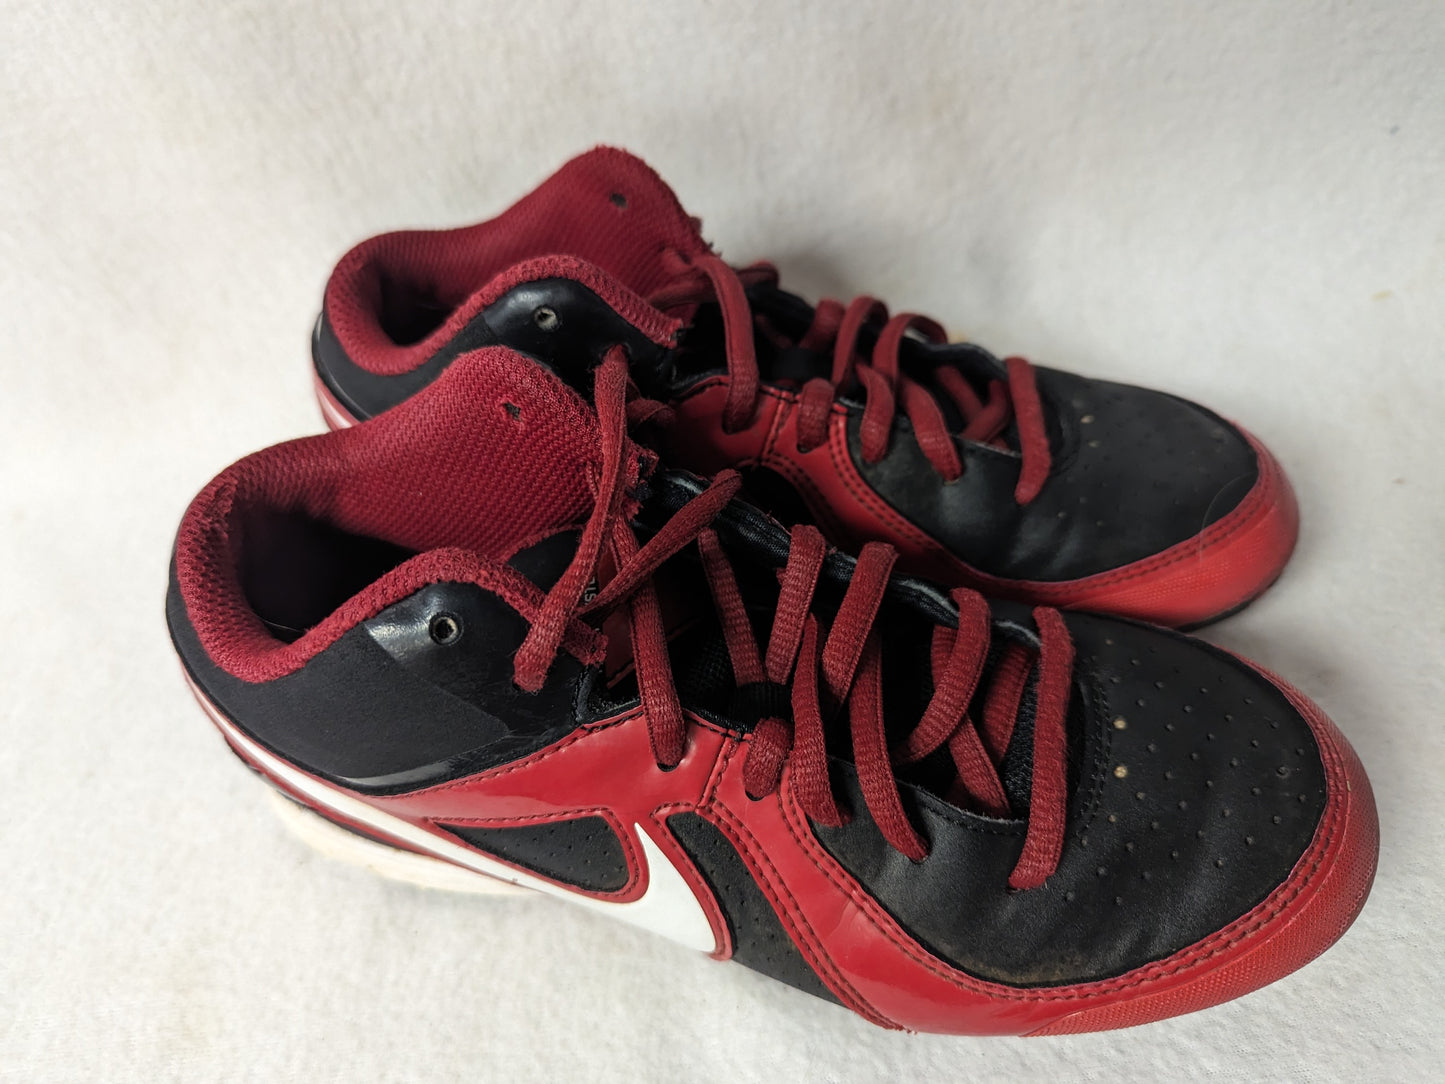 Nike Youth Cleats Size 3 Color Red Condition Used